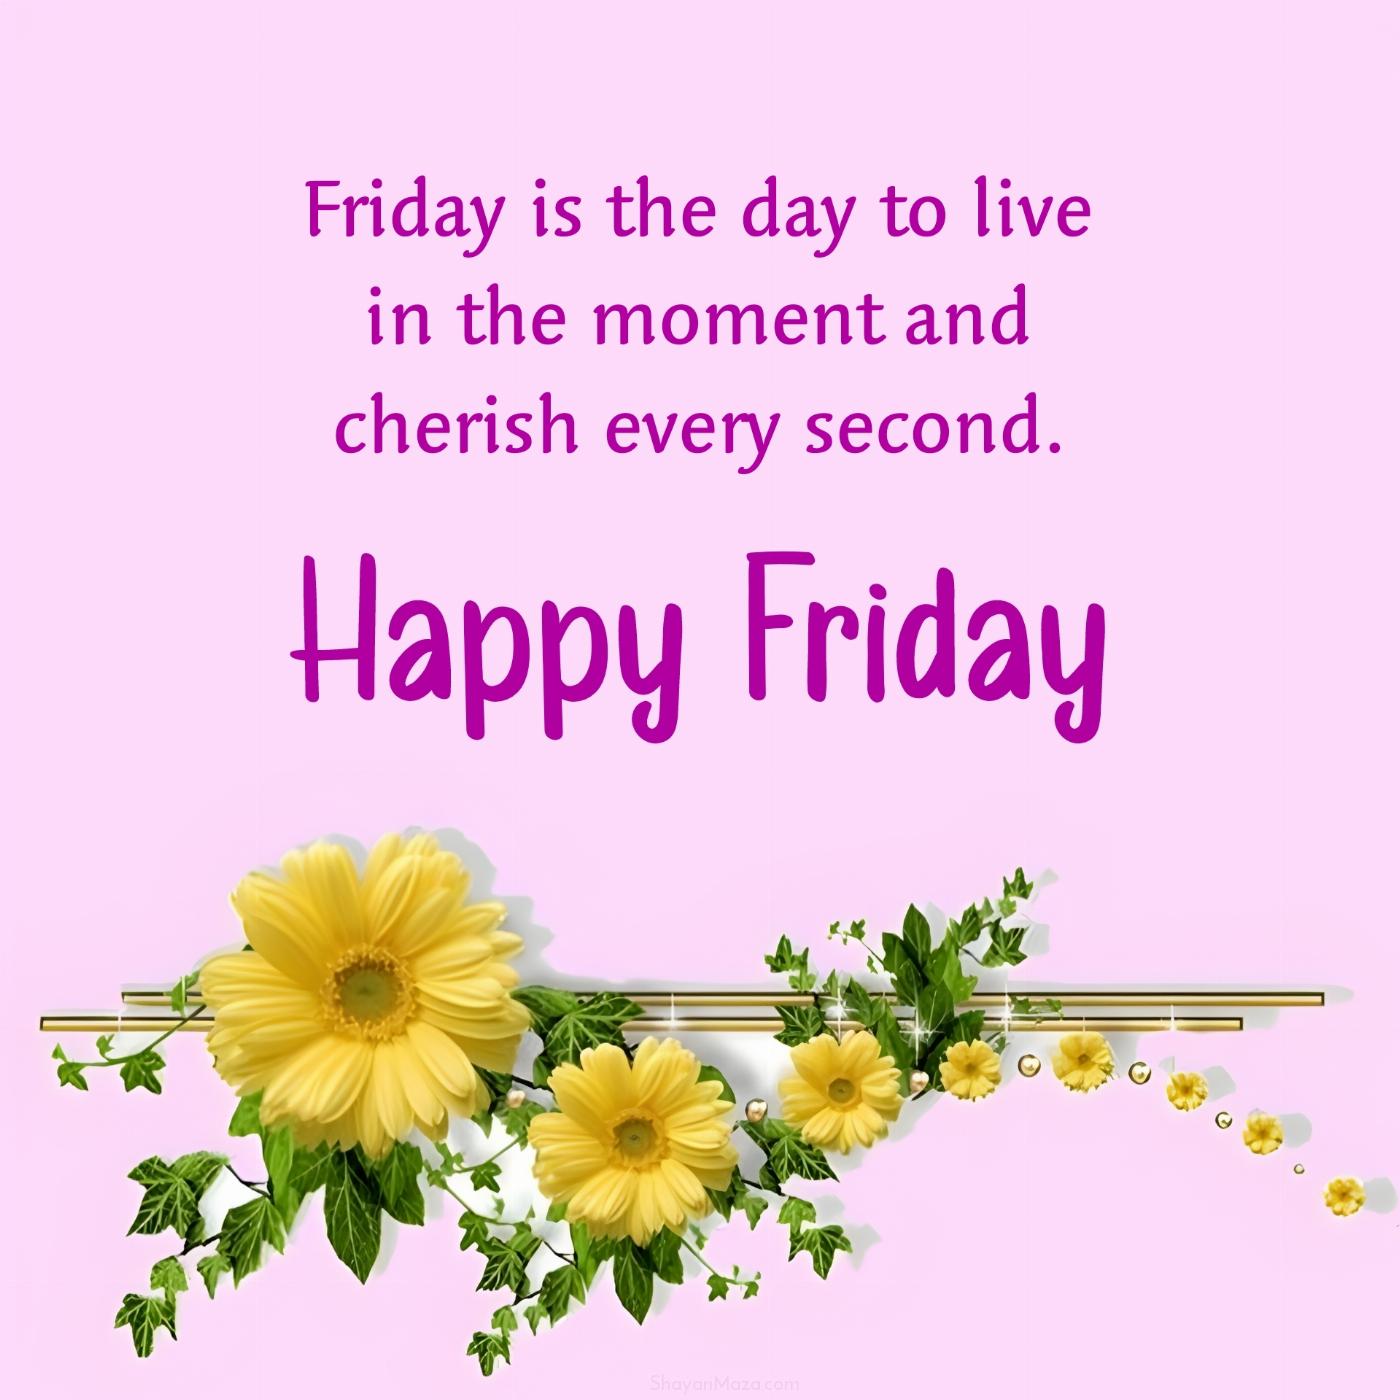 Friday is the day to live in the moment